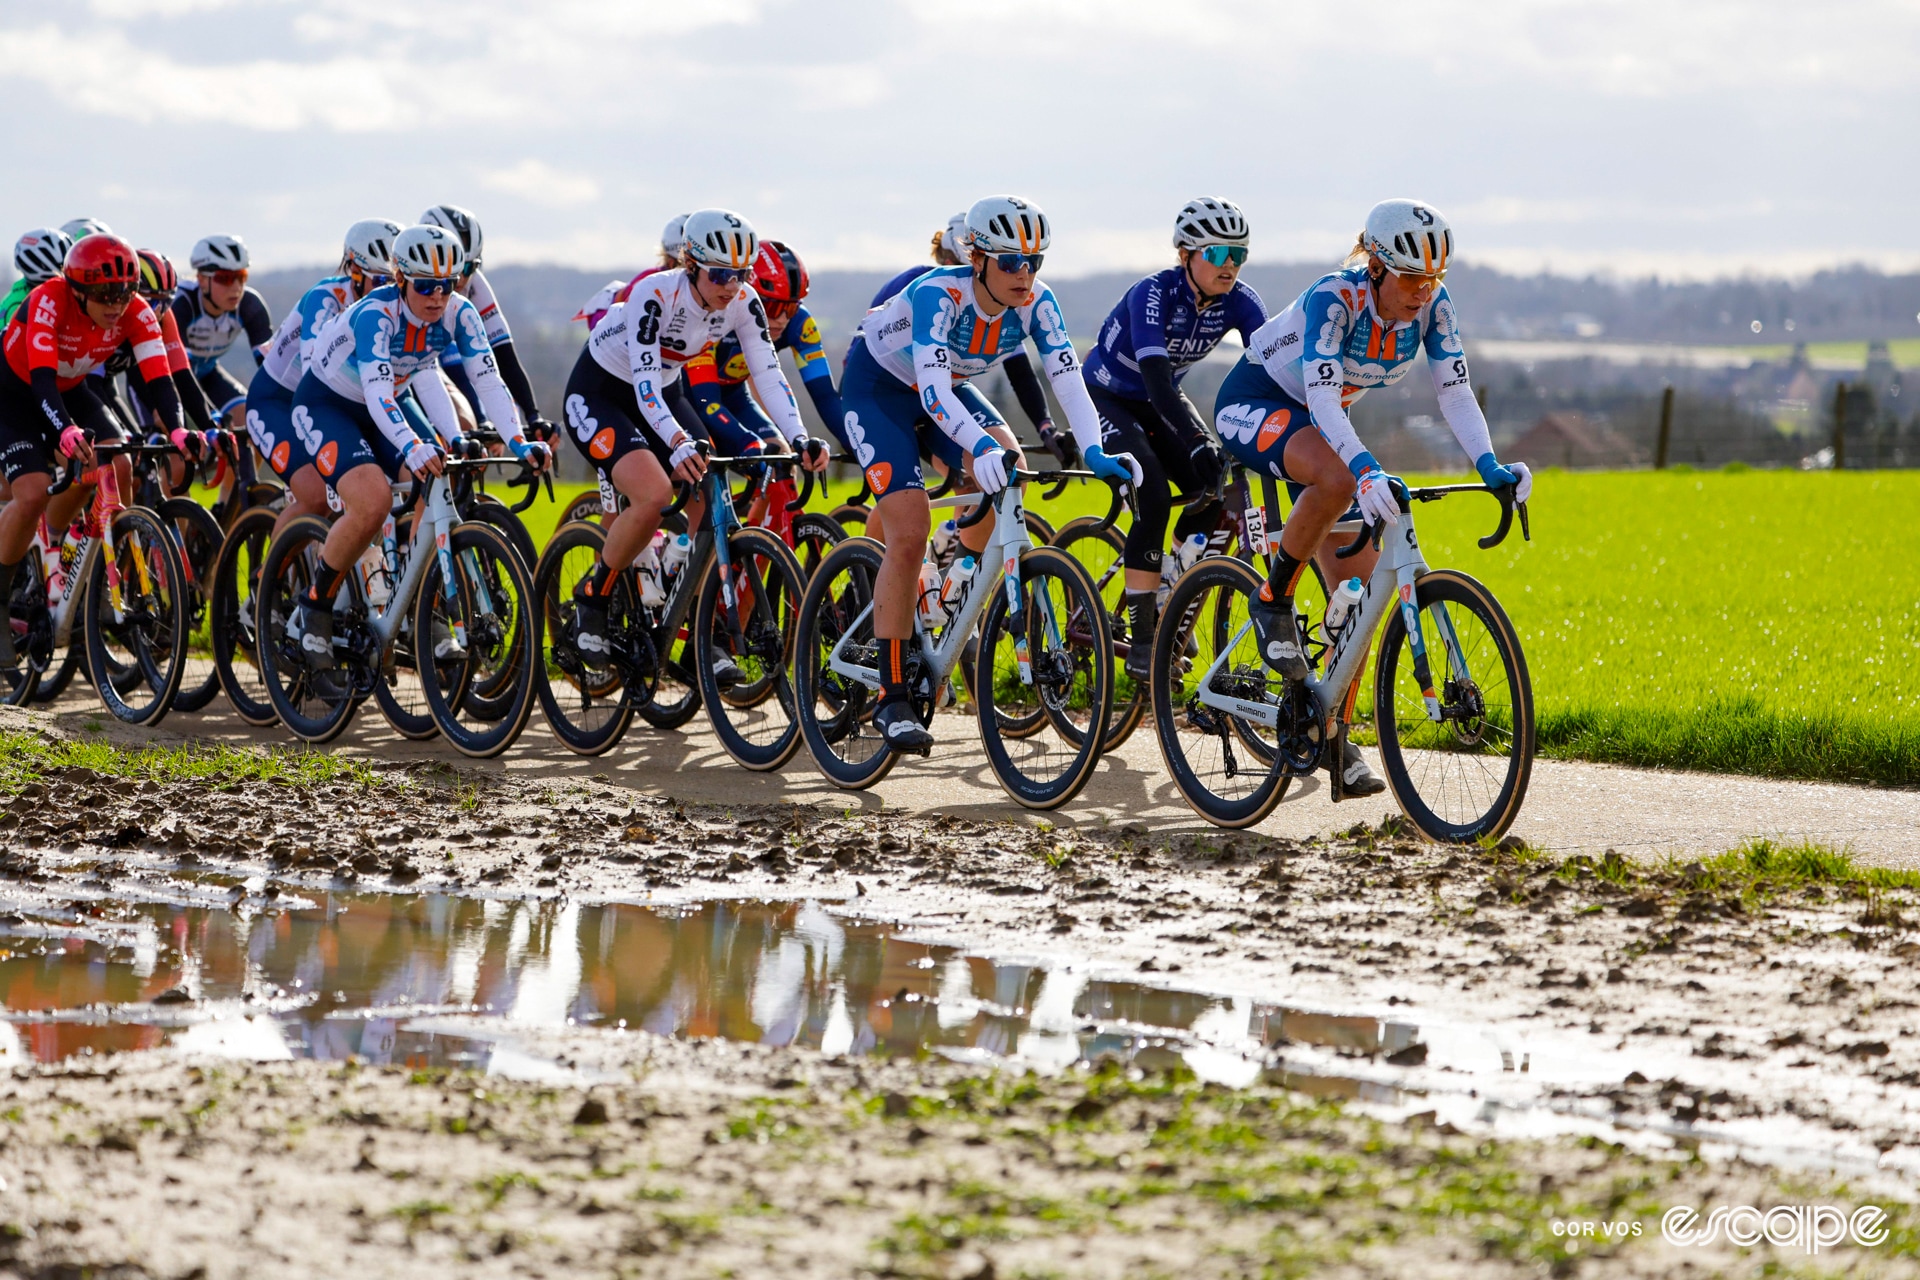 A peloton rides along in front of some mud